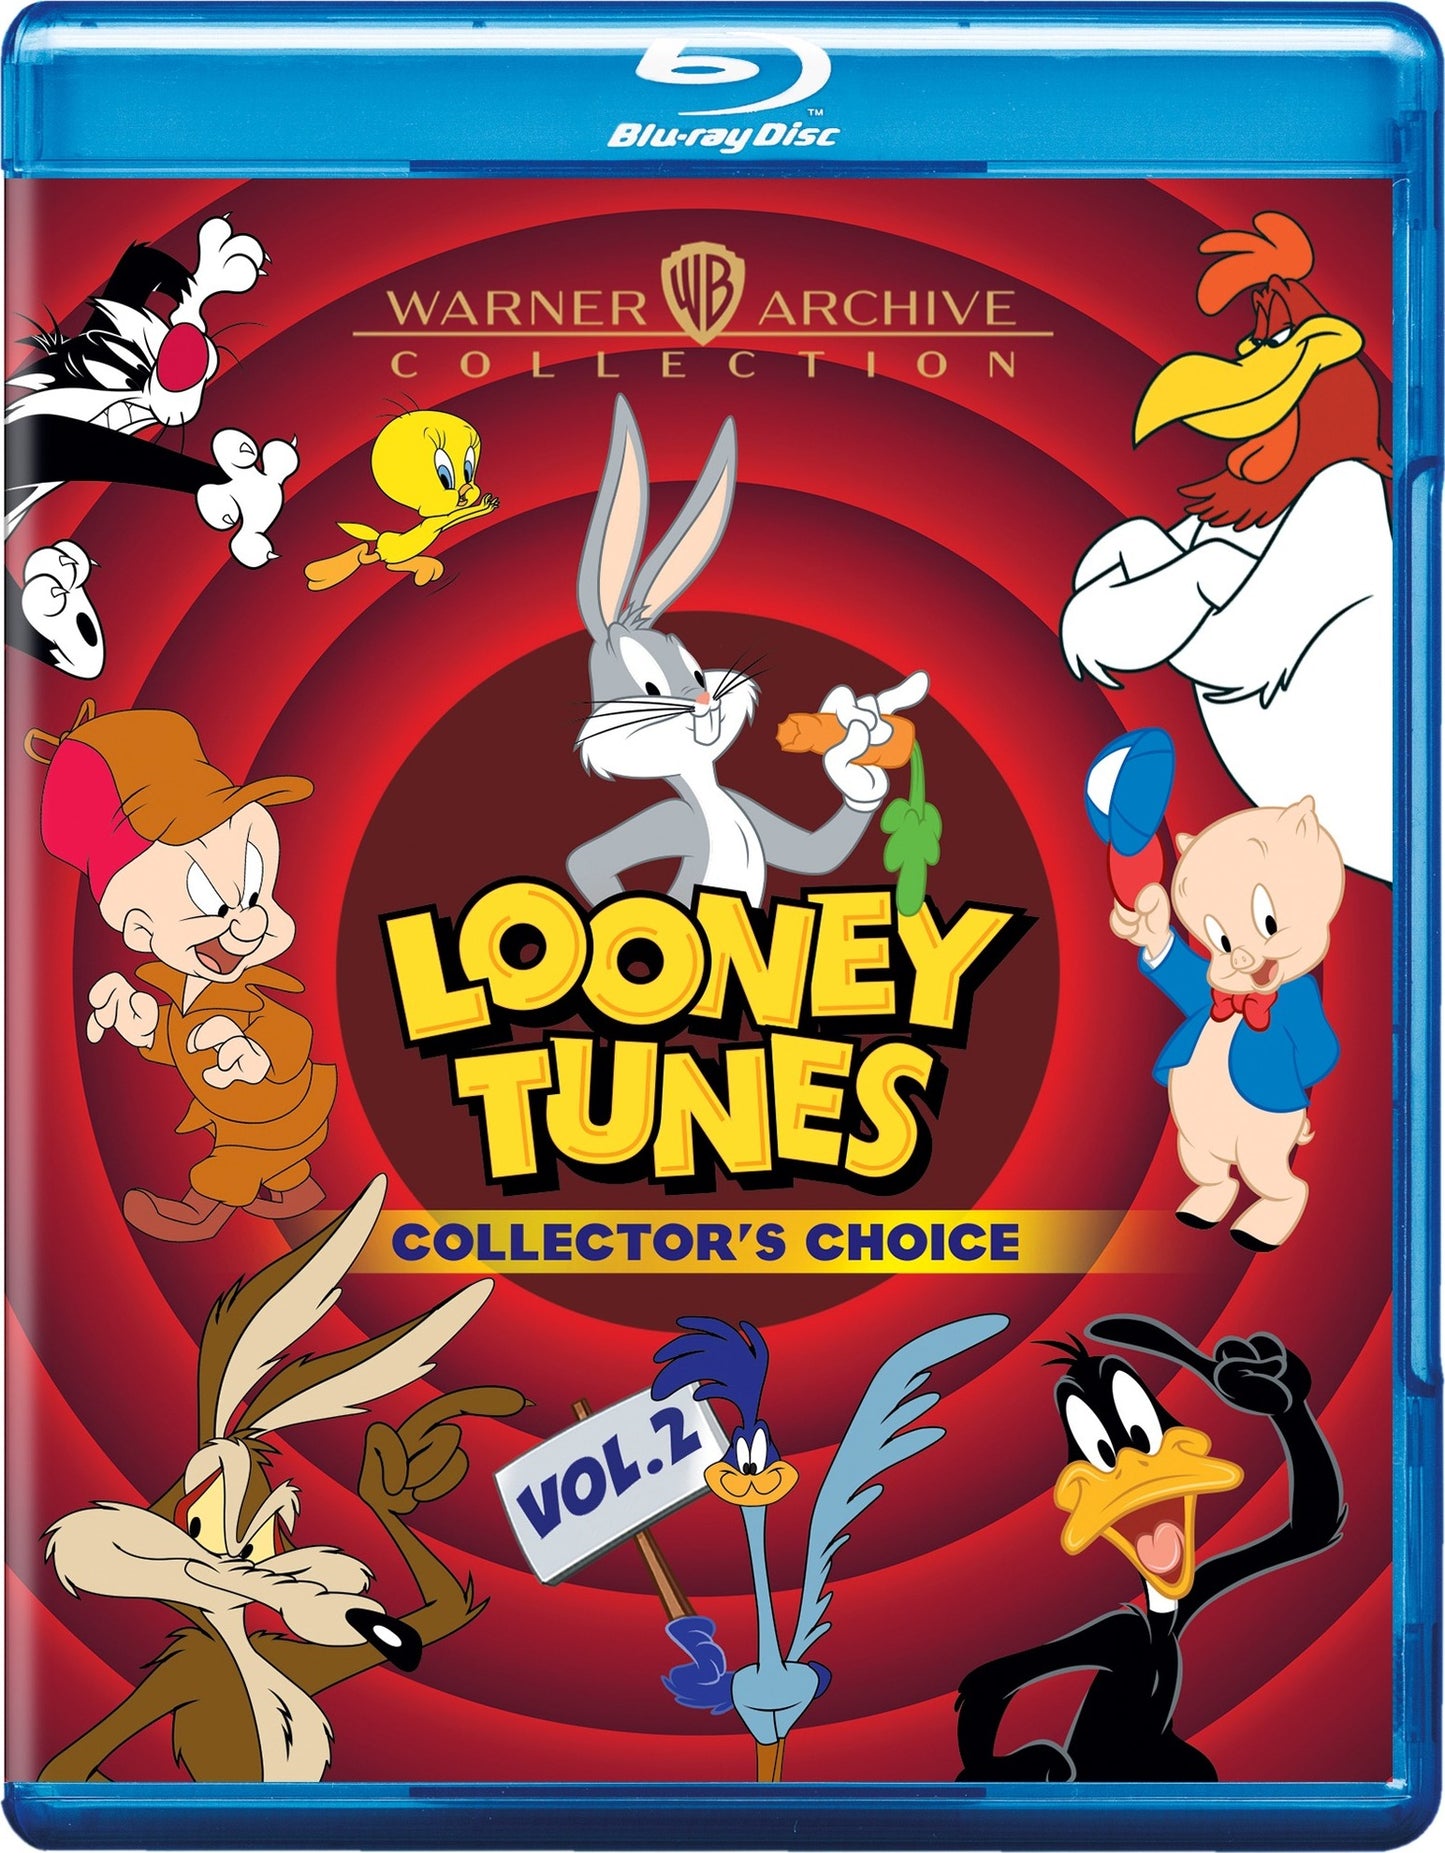 Looney Tunes Collector's Choice: Volume 2 - Warner Archive Collection